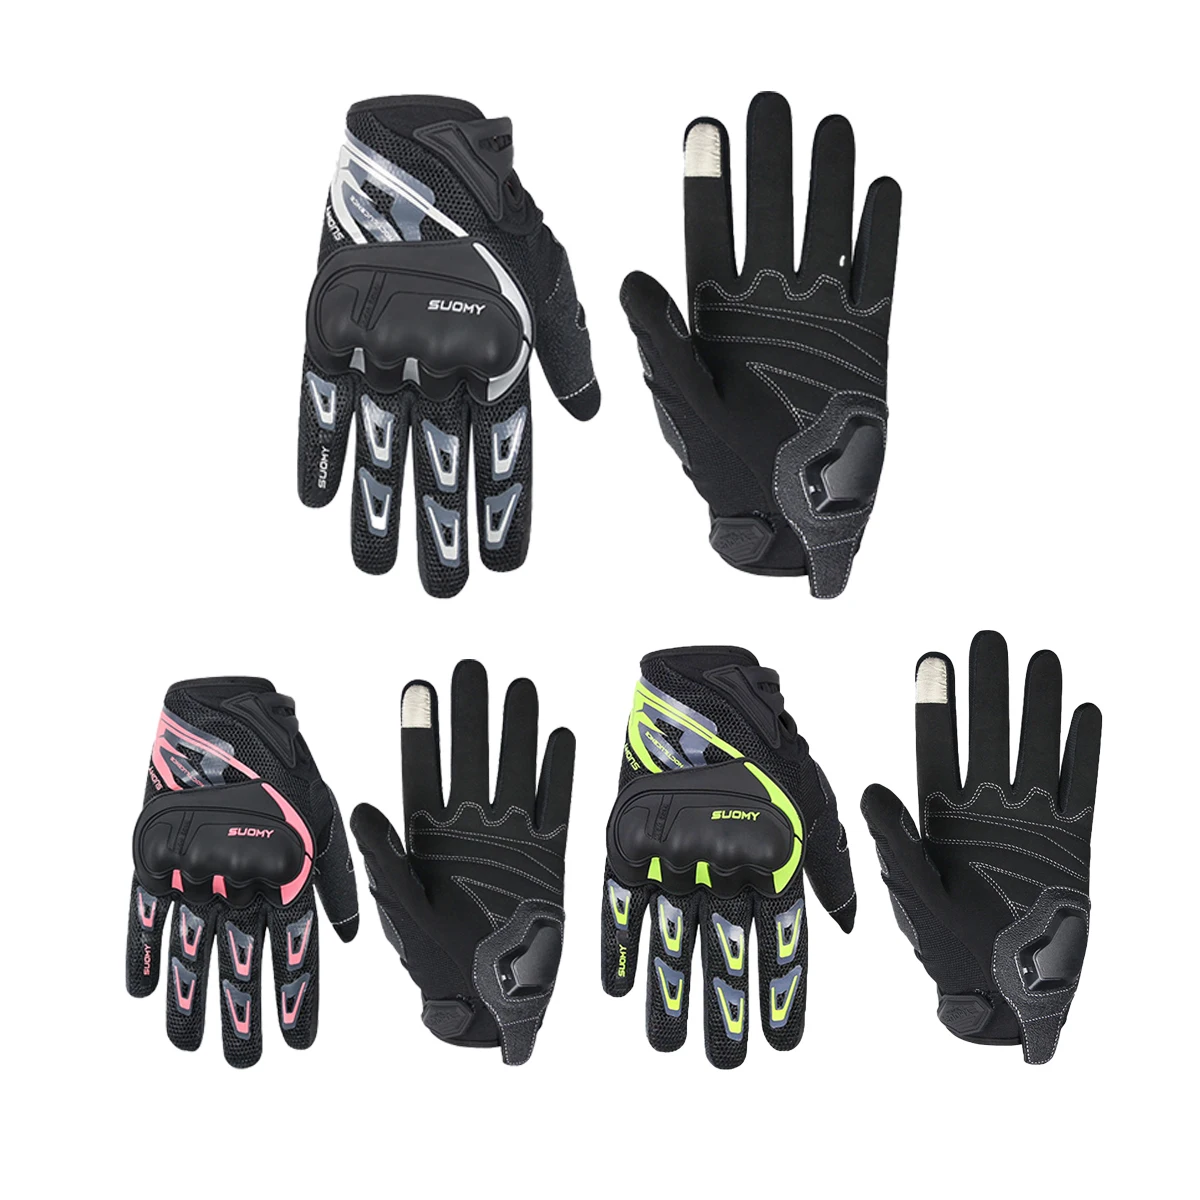 

SUOMY Summer Breathable Motorcycle Gloves Touch Screen Guantes Motorbike Protective Gloves Cycling Racing Full Finger Gloves